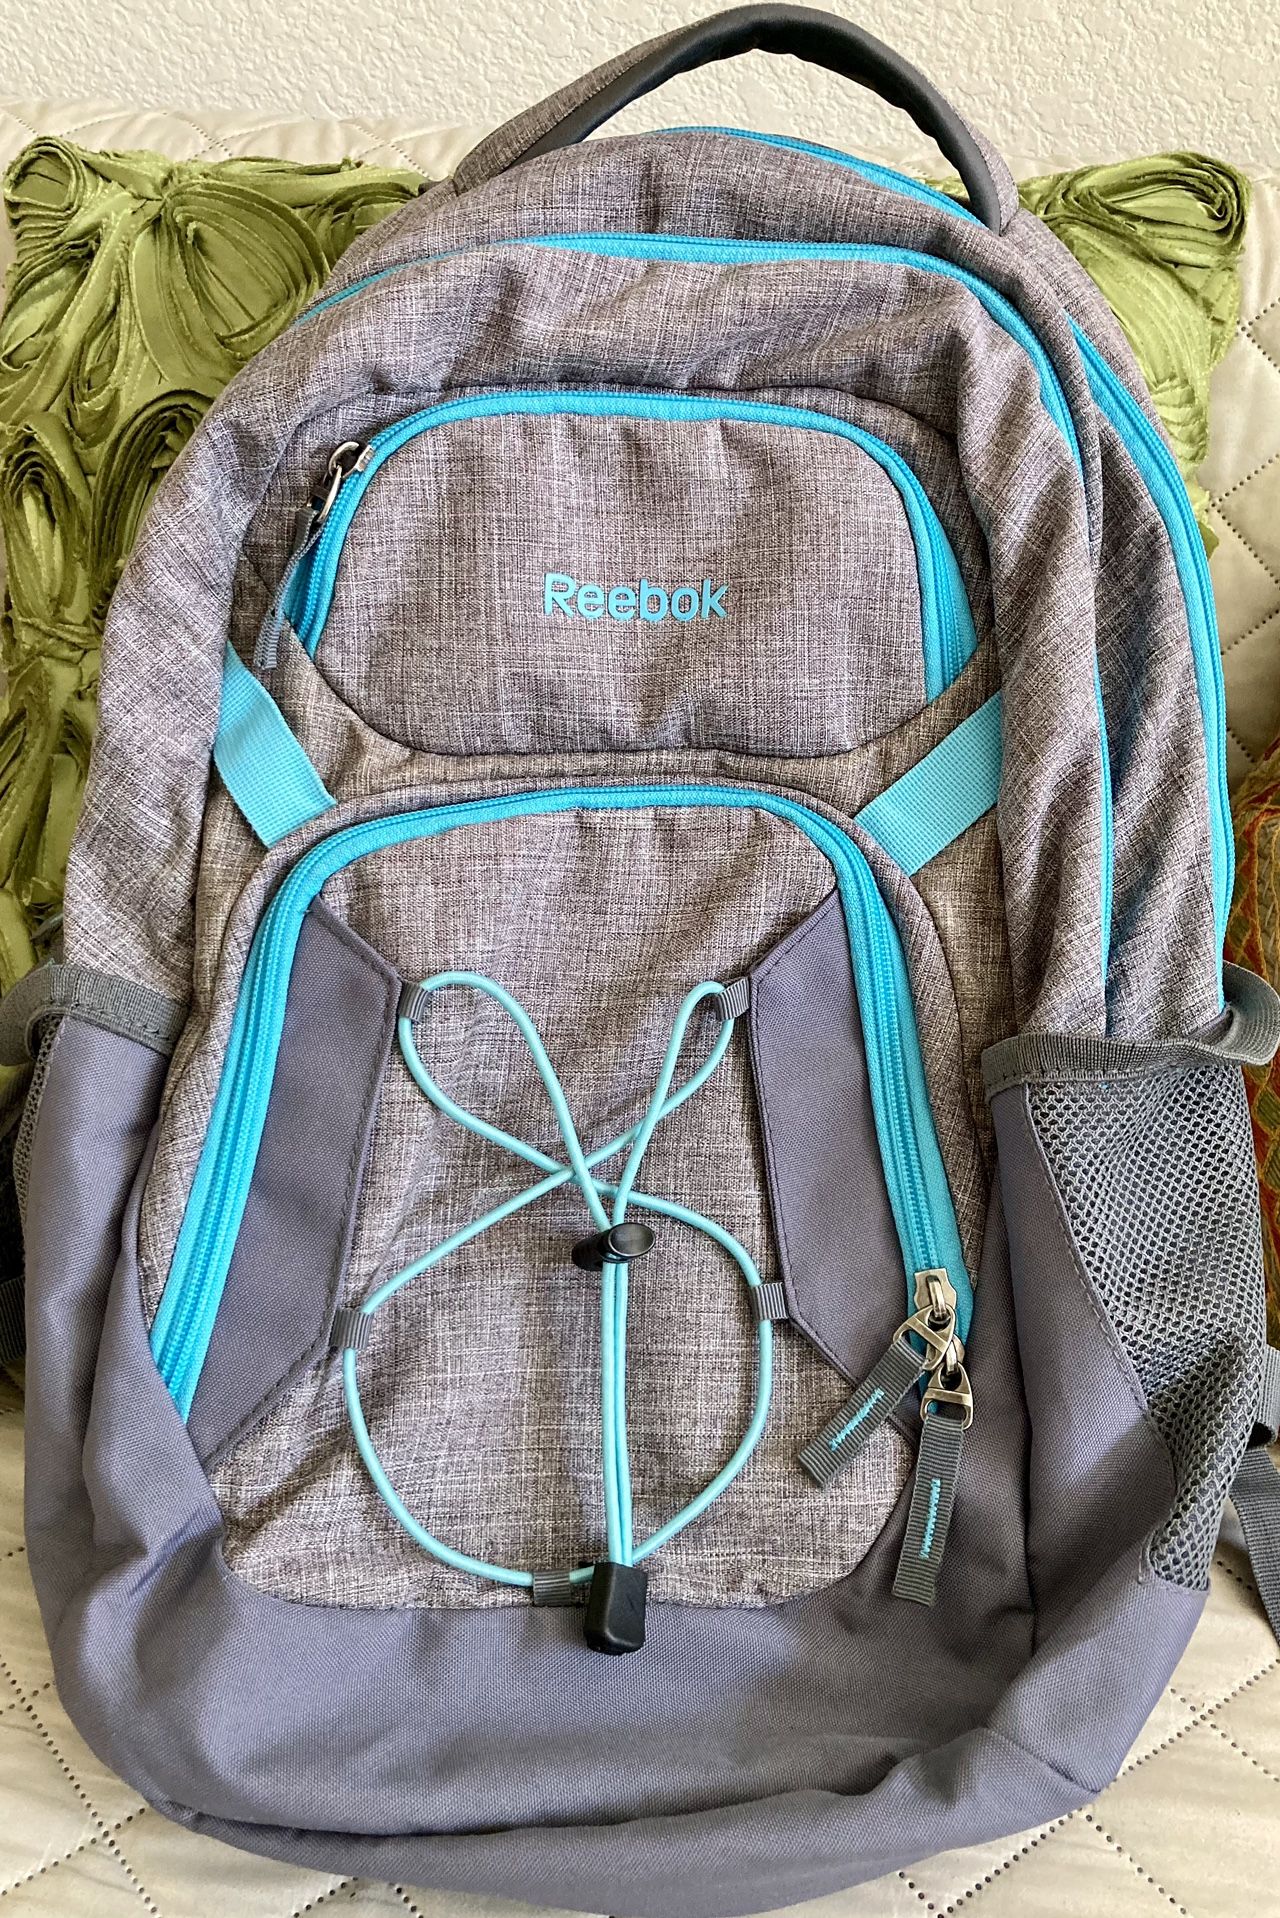 Reebok Gray & Turquoise Backpack w/ multiple zippered pockets 